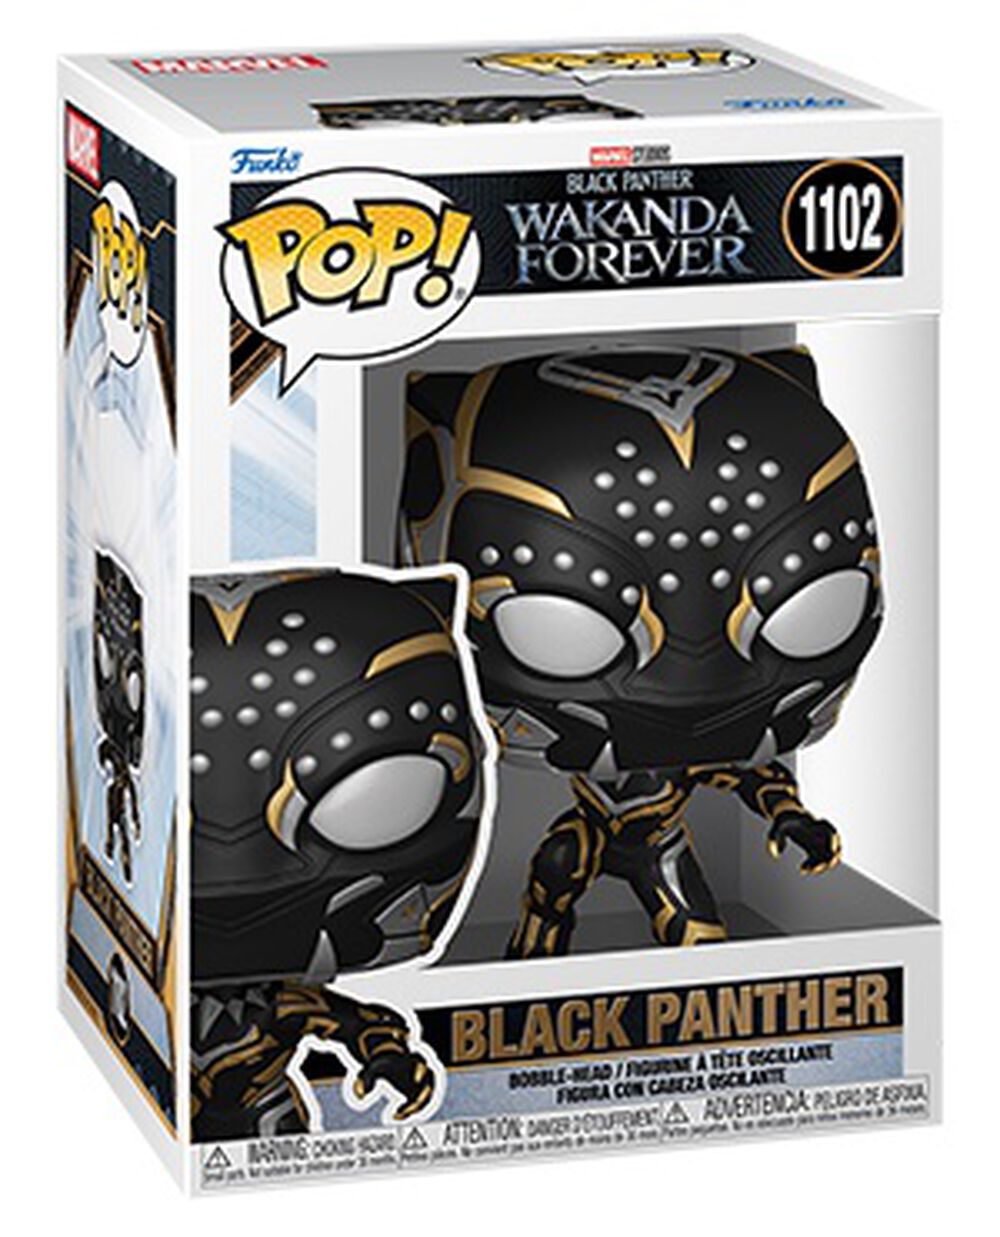 BLACK PANTHER FUNKO POP MARVEL BLACK PANTHER WAKANDA FOREVER 1102 W/ PROTECTOR